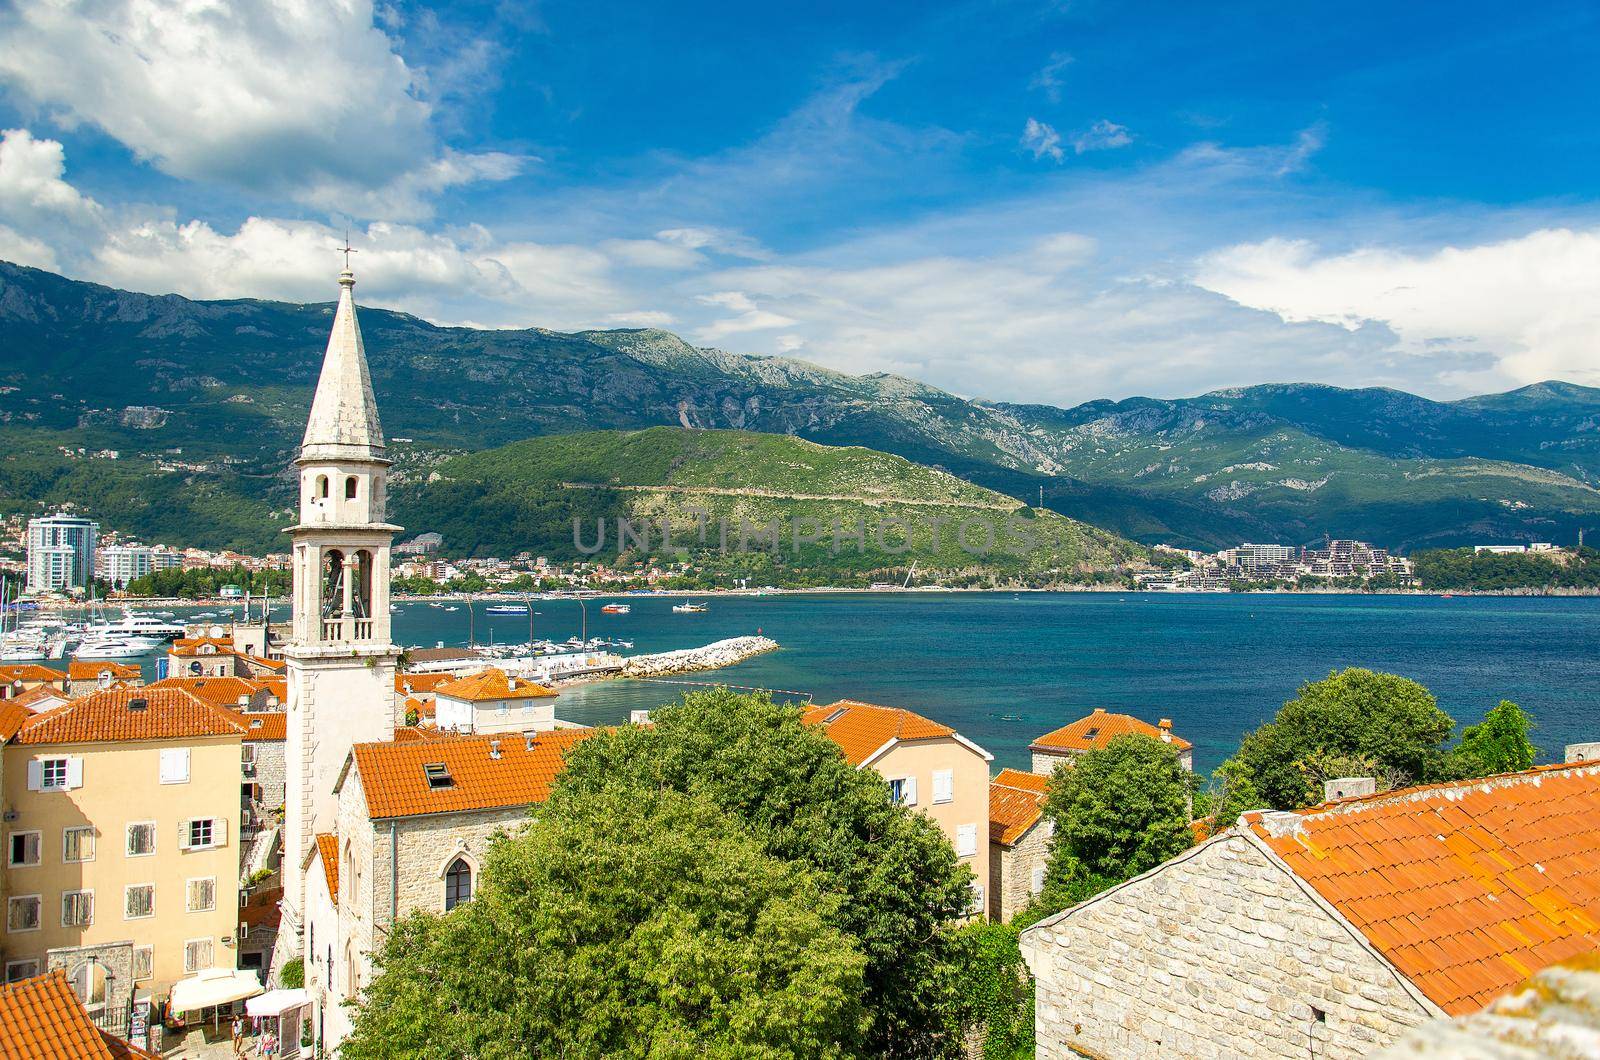 Panoramic view from citadel fortress of Old town Budva with medieval buildings, red tiled roofs, chapel of Saint Ivan church, marine, bay, range of mountains and Adriatic Riviera, Montenegro